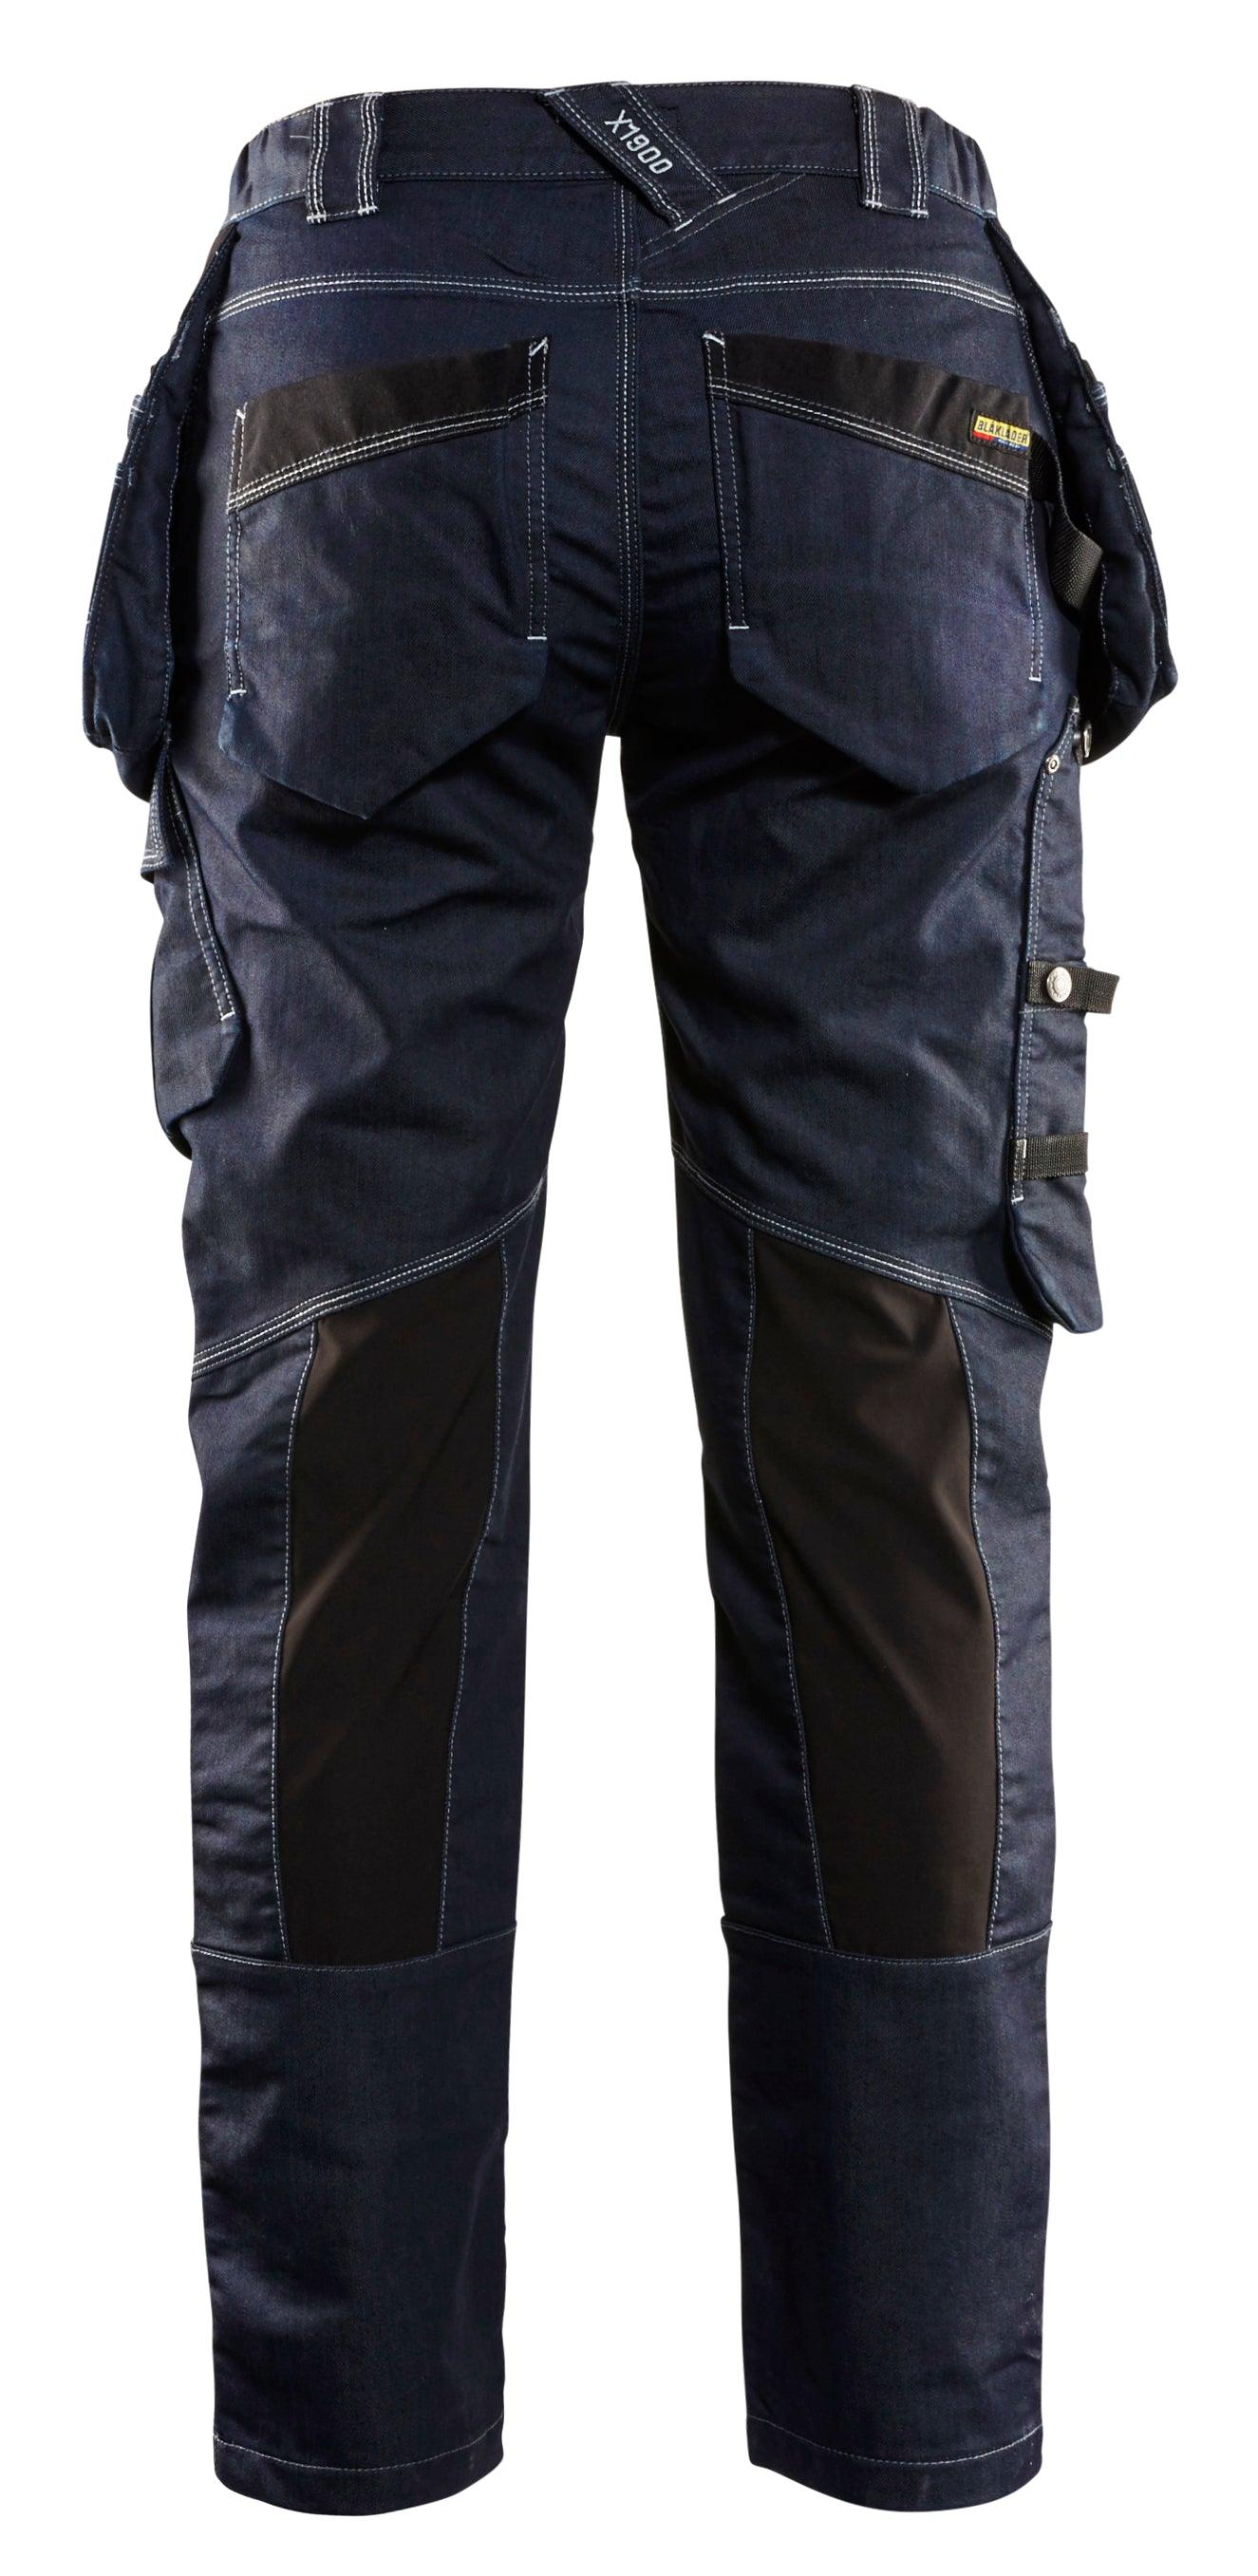 Blaklader 7990 10oz Women's Work Pants with Stretch and Utility Pockets -  Navy Blue/Black